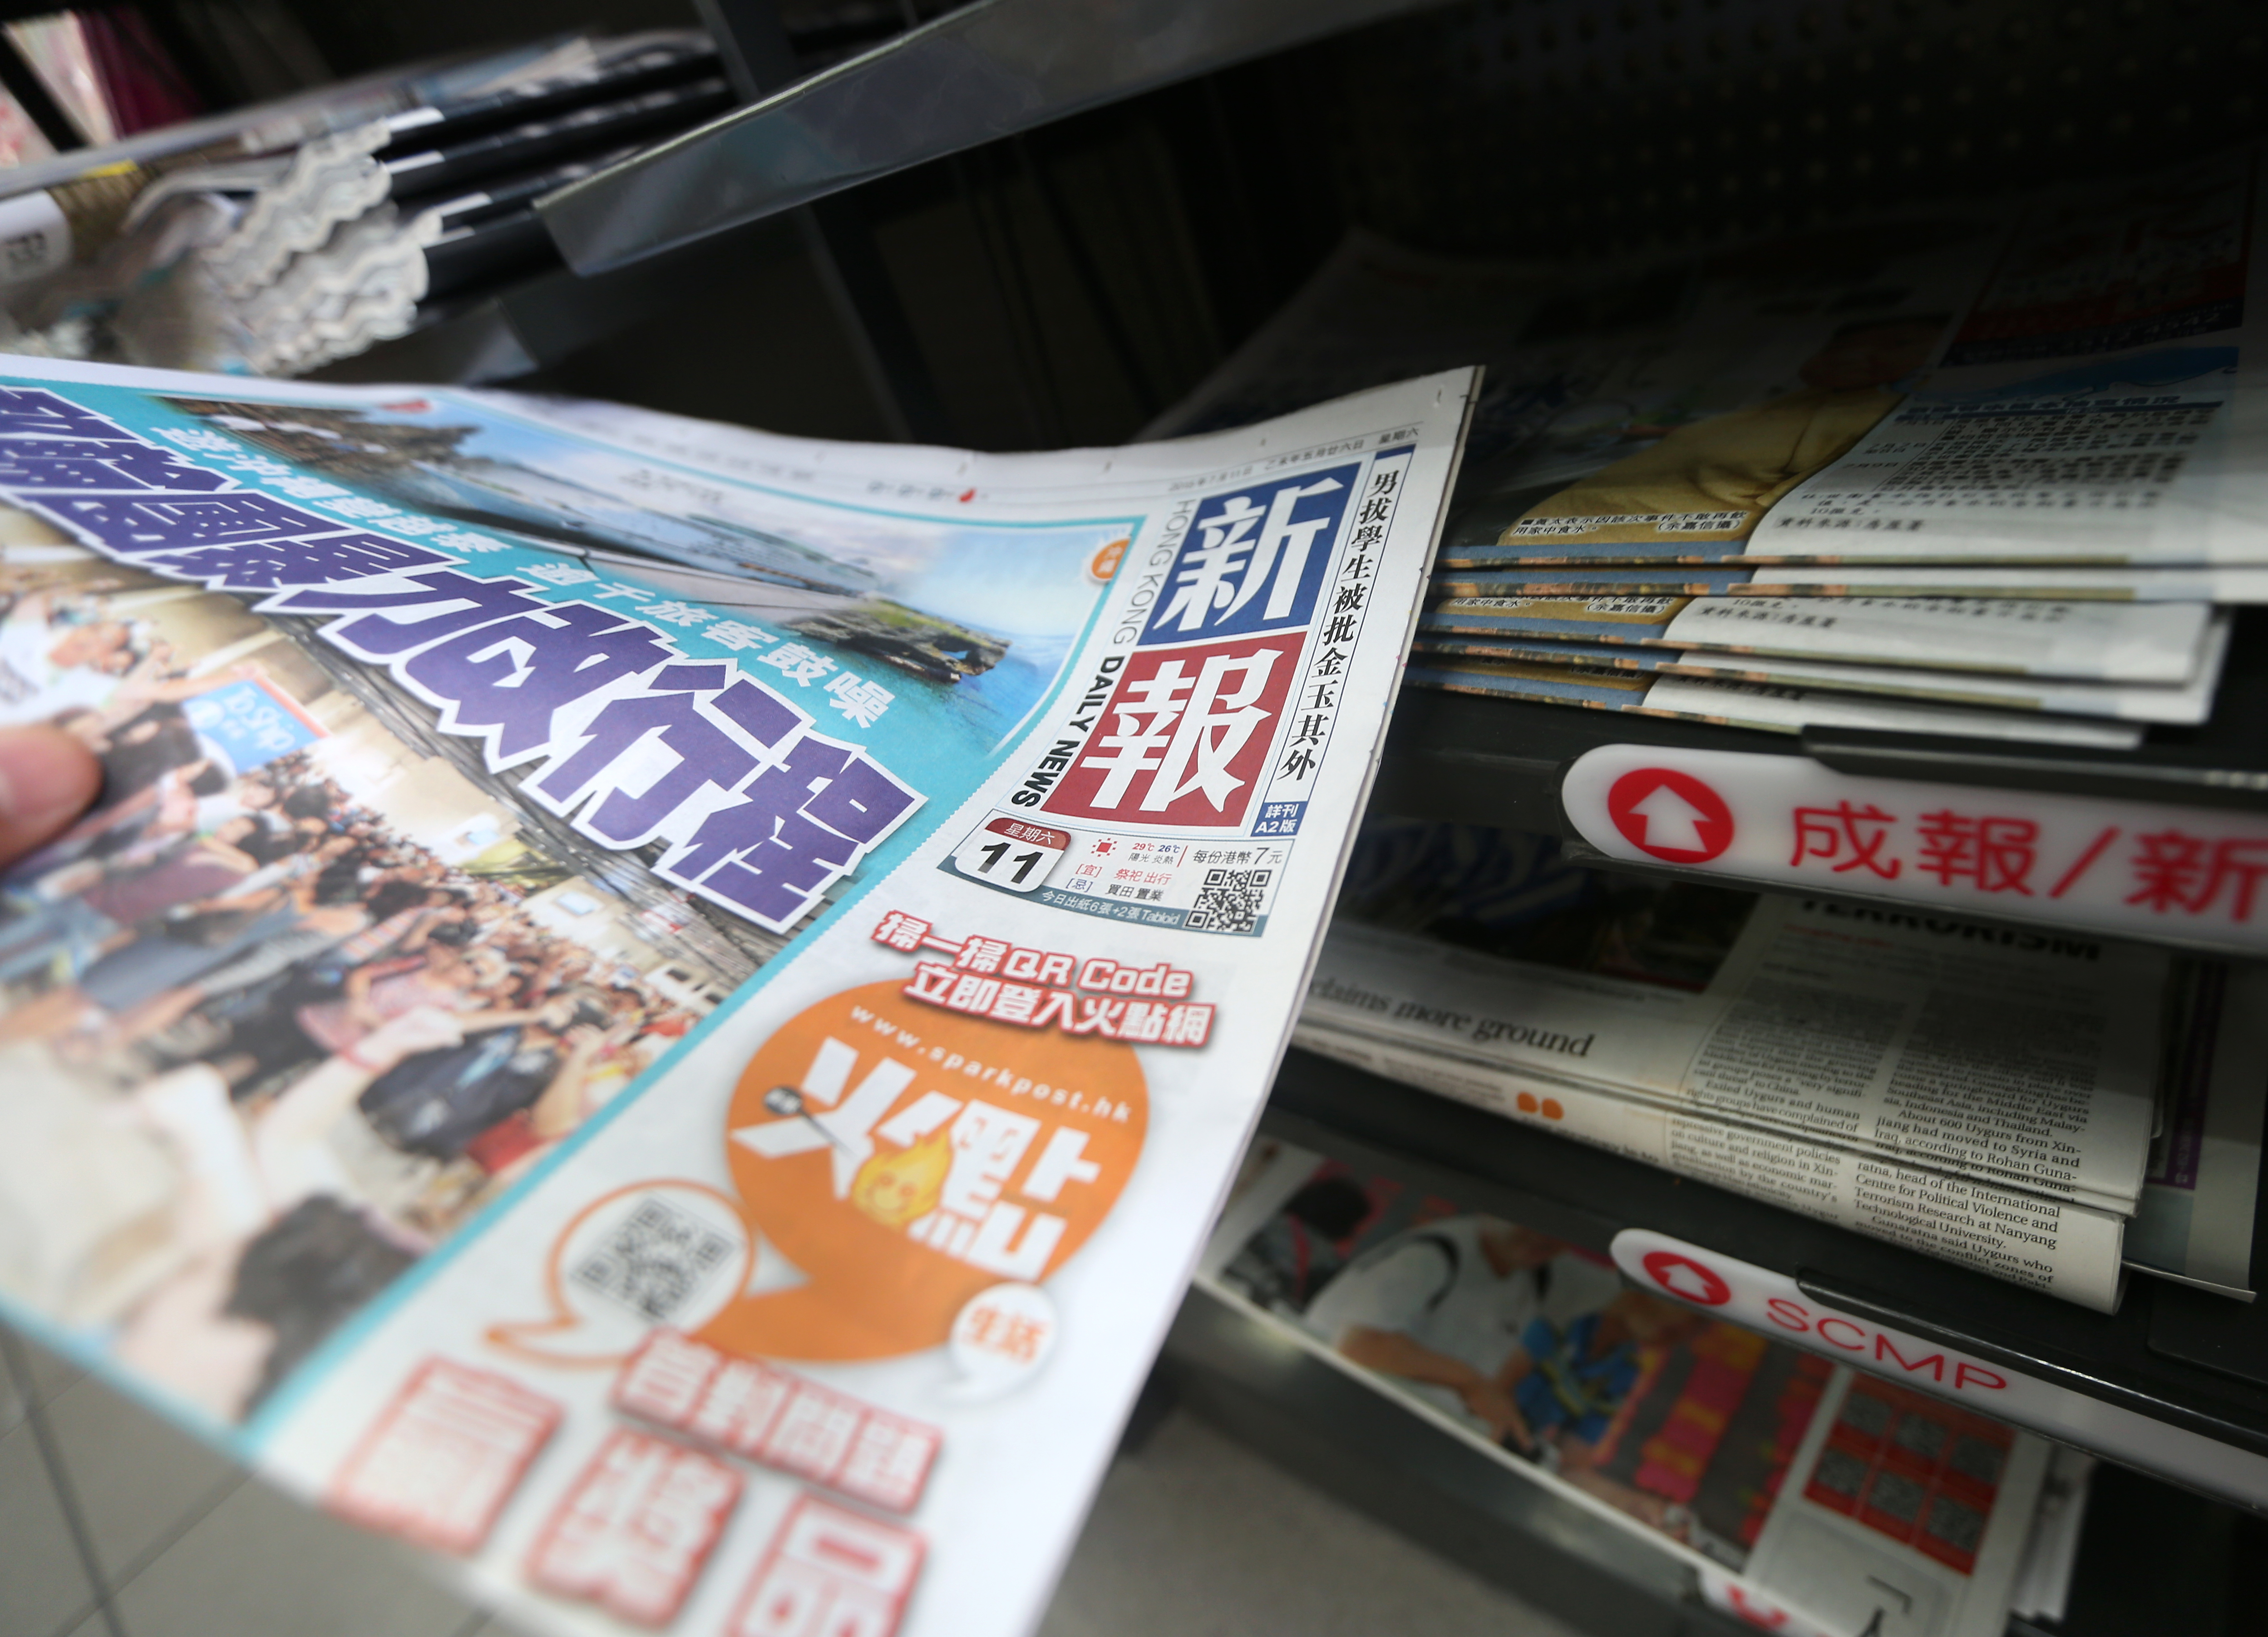 The newspaper is full of doom and gloom, says Kenny Hodgart. Photo: SCMP Pictures